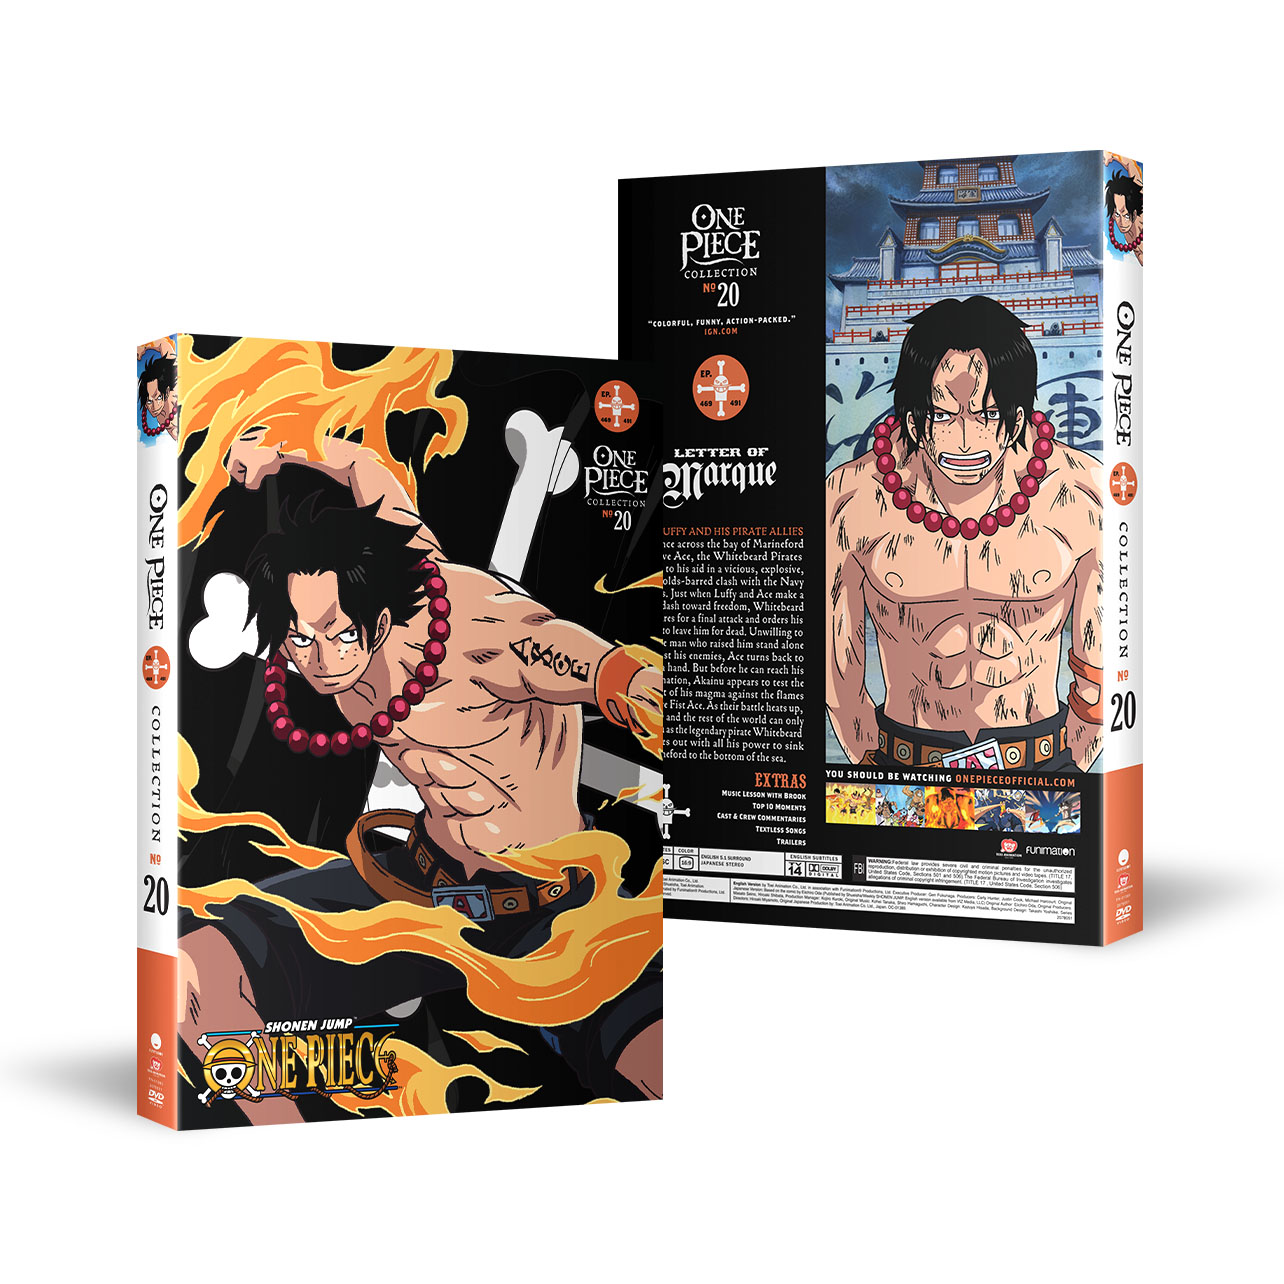 One Piece - Collection 20 - DVD image count 0